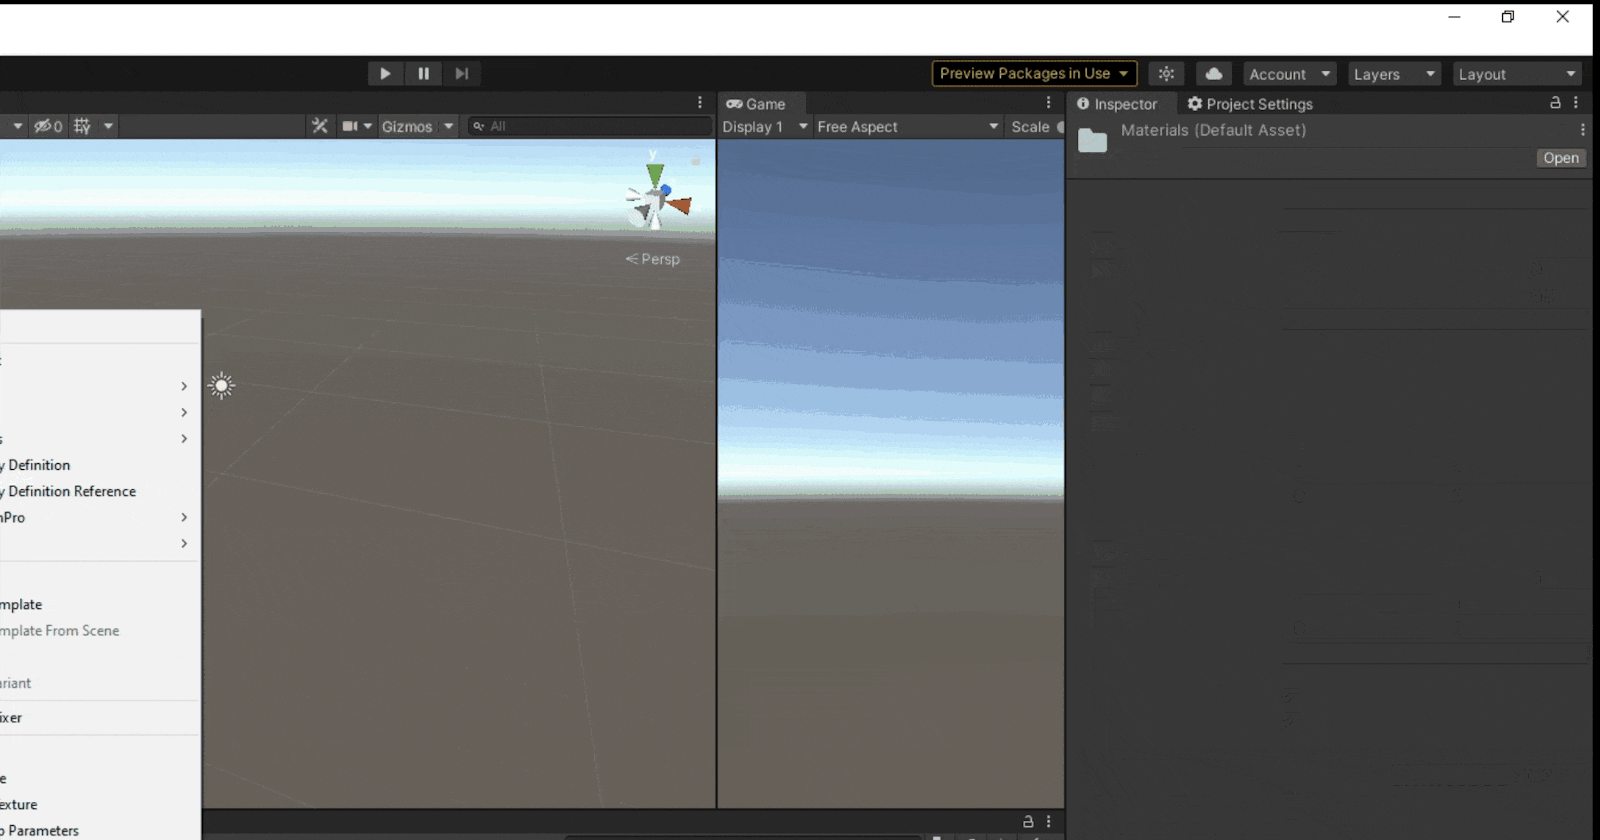 How To Apply Color To A Game Object In Unity?